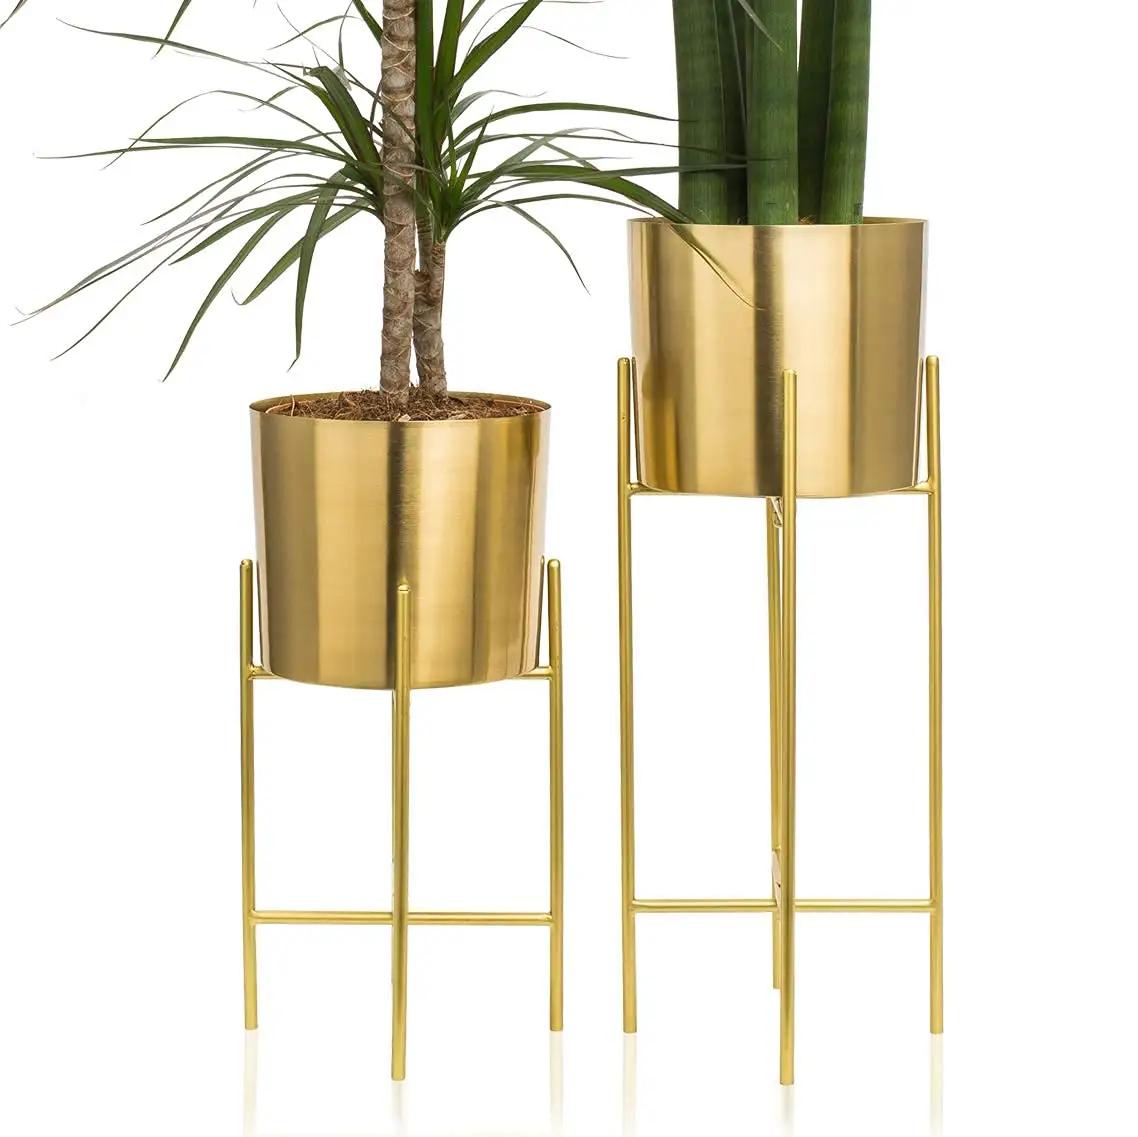 Modern Gold Metal Flower Pot with Metal Stand Tall Planter Floor Table Decor Plant Holder Display Set of 2